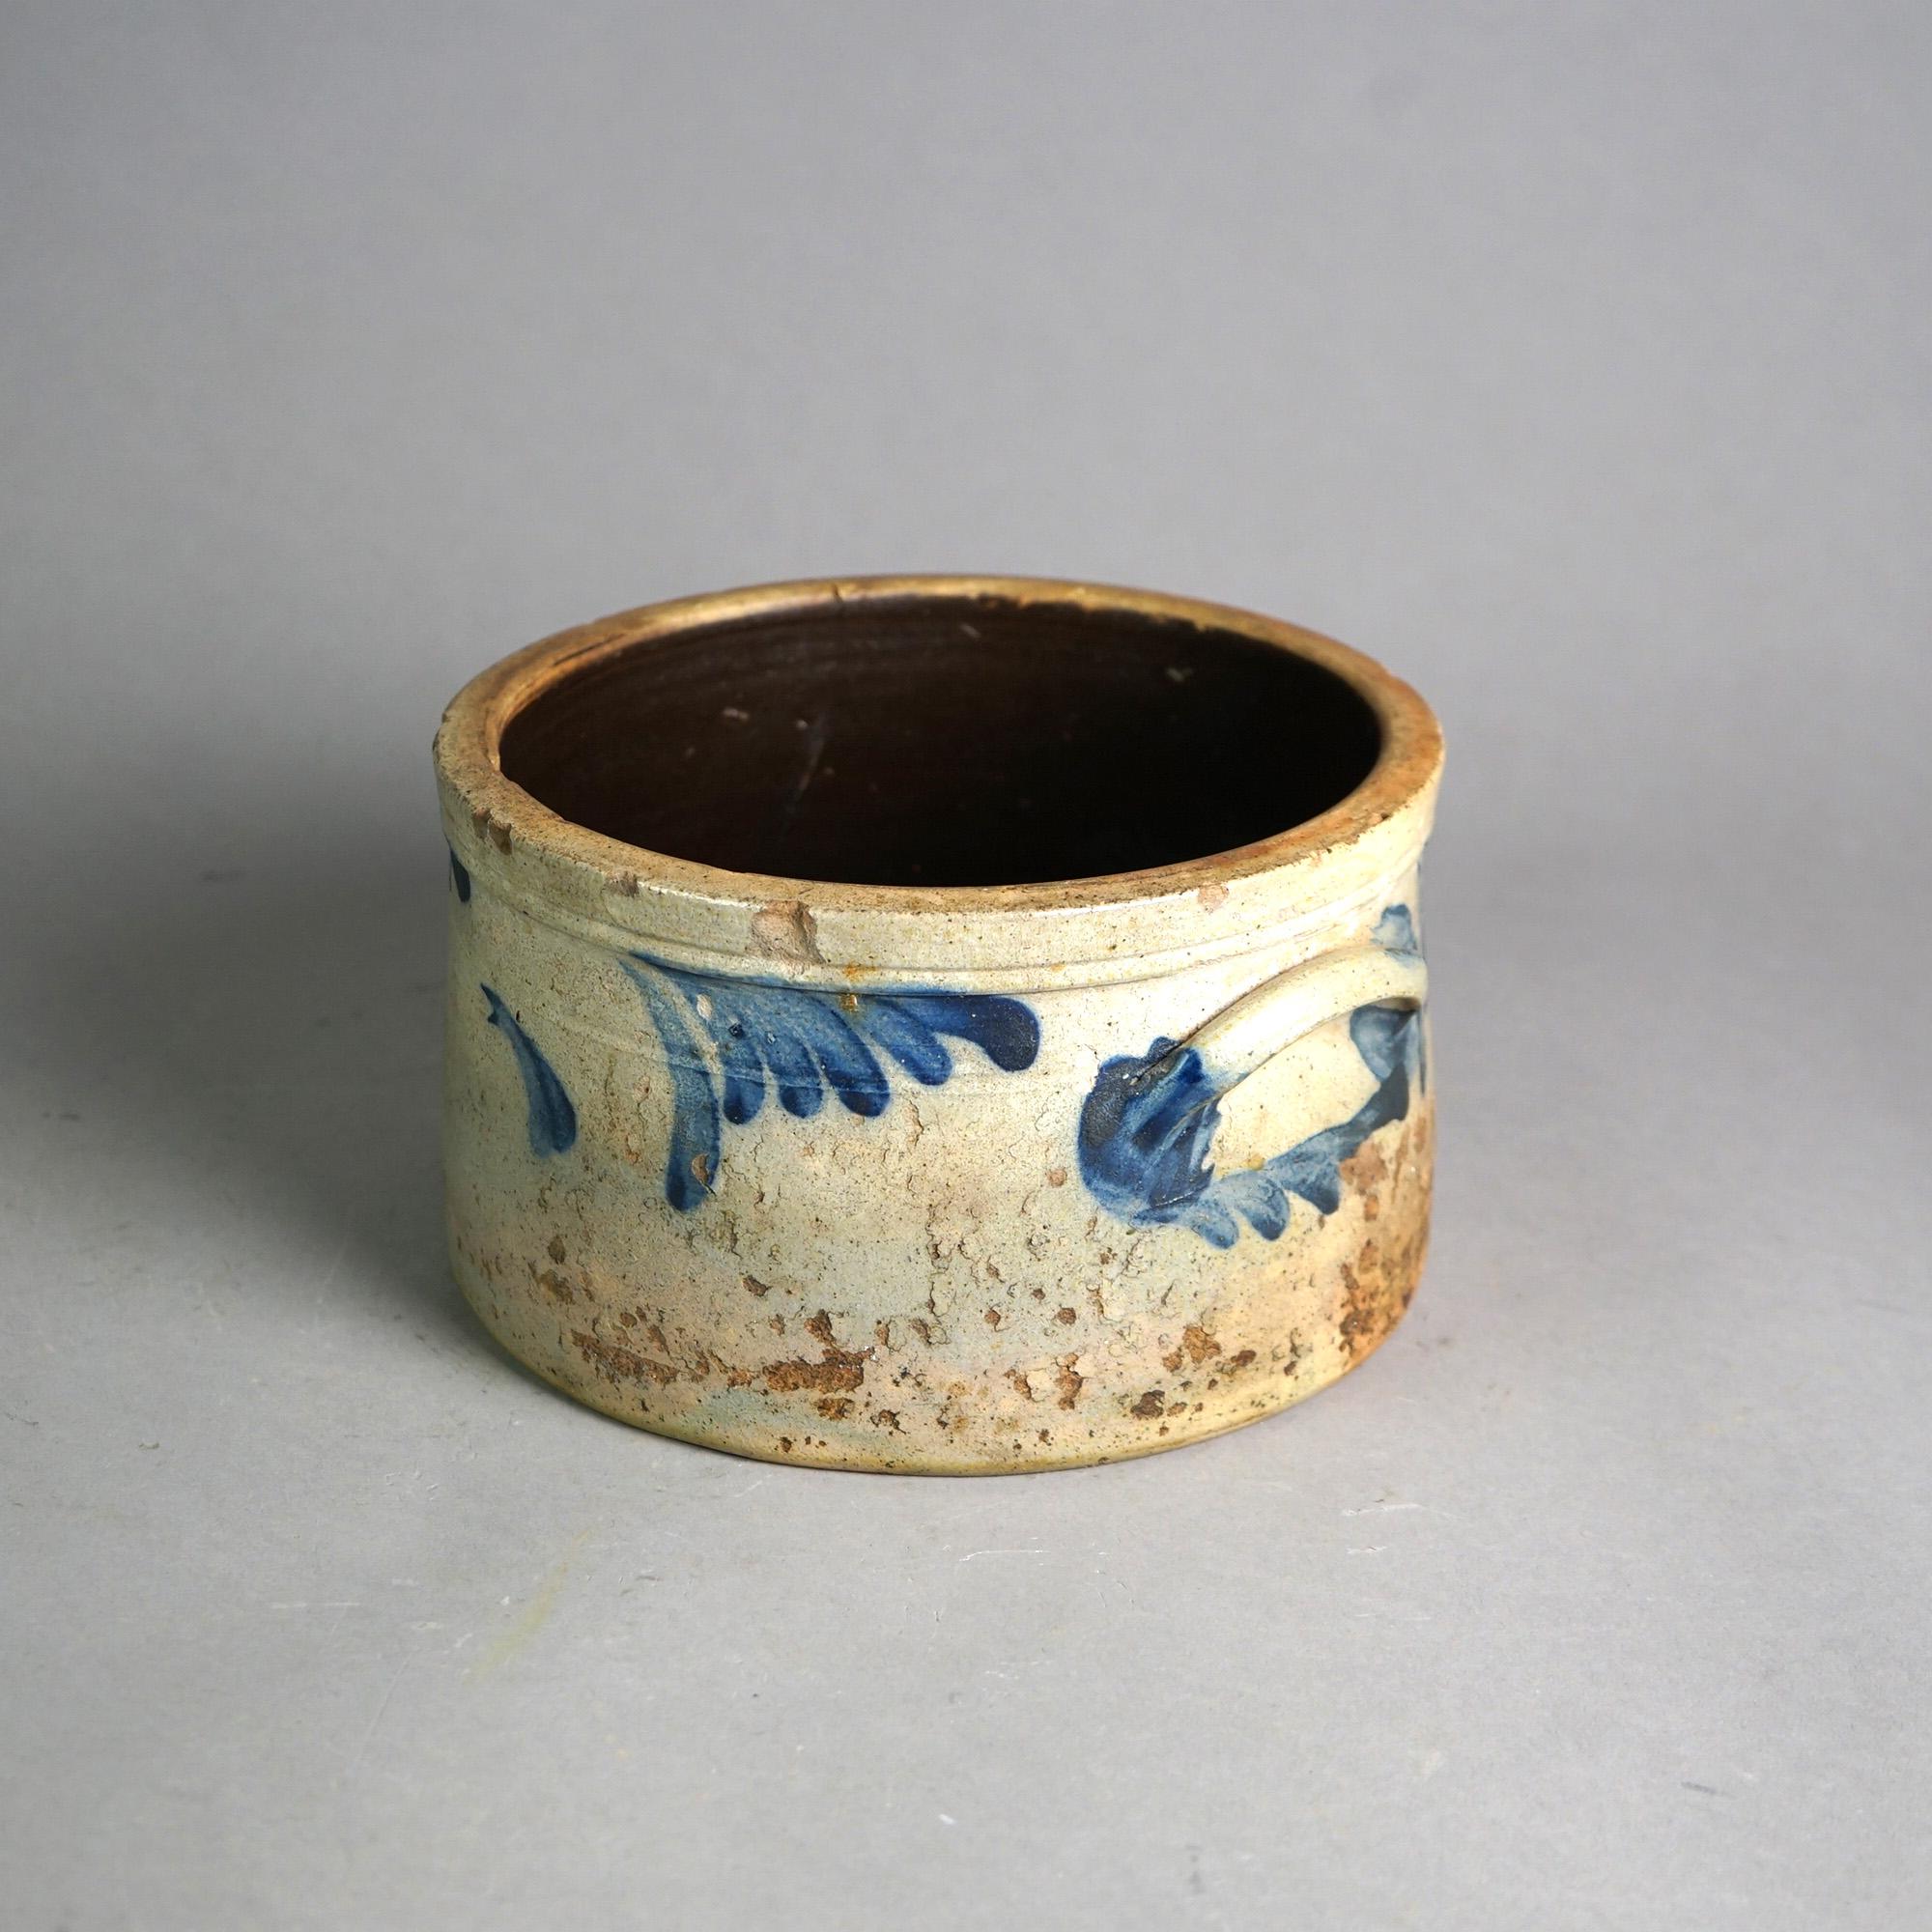 An antique Philadelphia cake crock offers stoneware construction with double handles and blue decoration in foliate design, c1870

Measures - 4.75